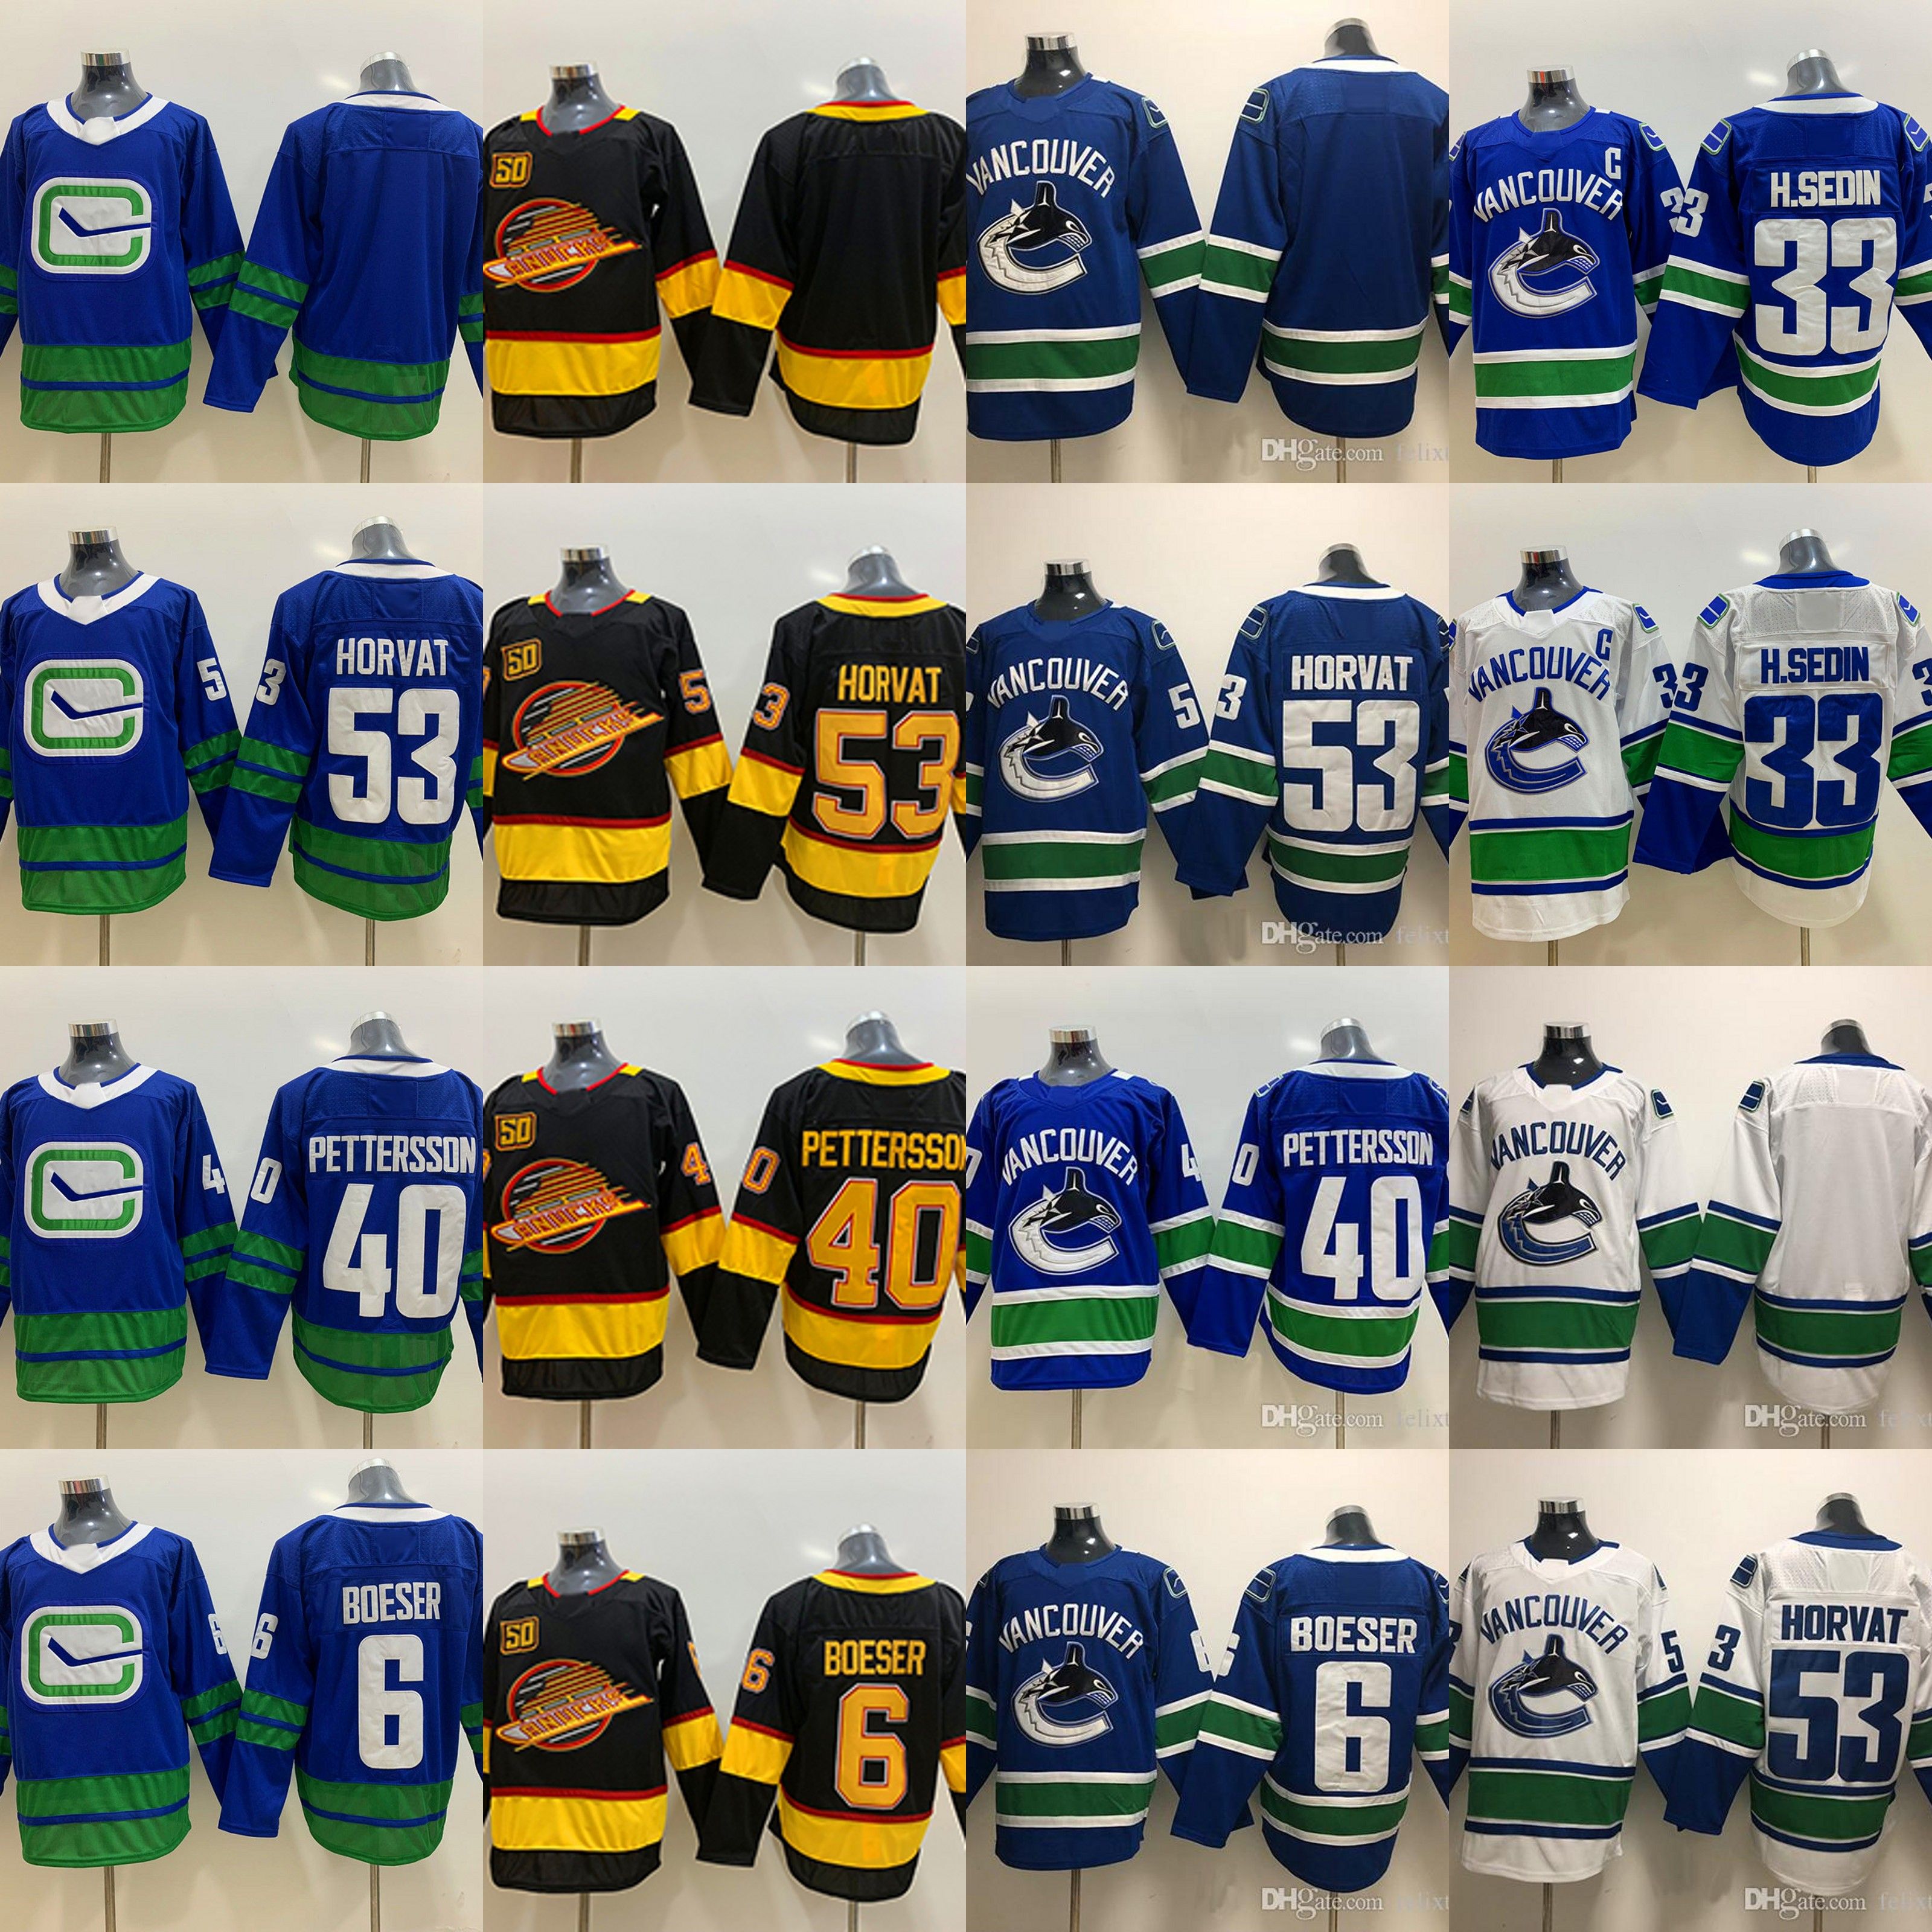 Canucks unveil quartet of new sweaters for 50th anniversary